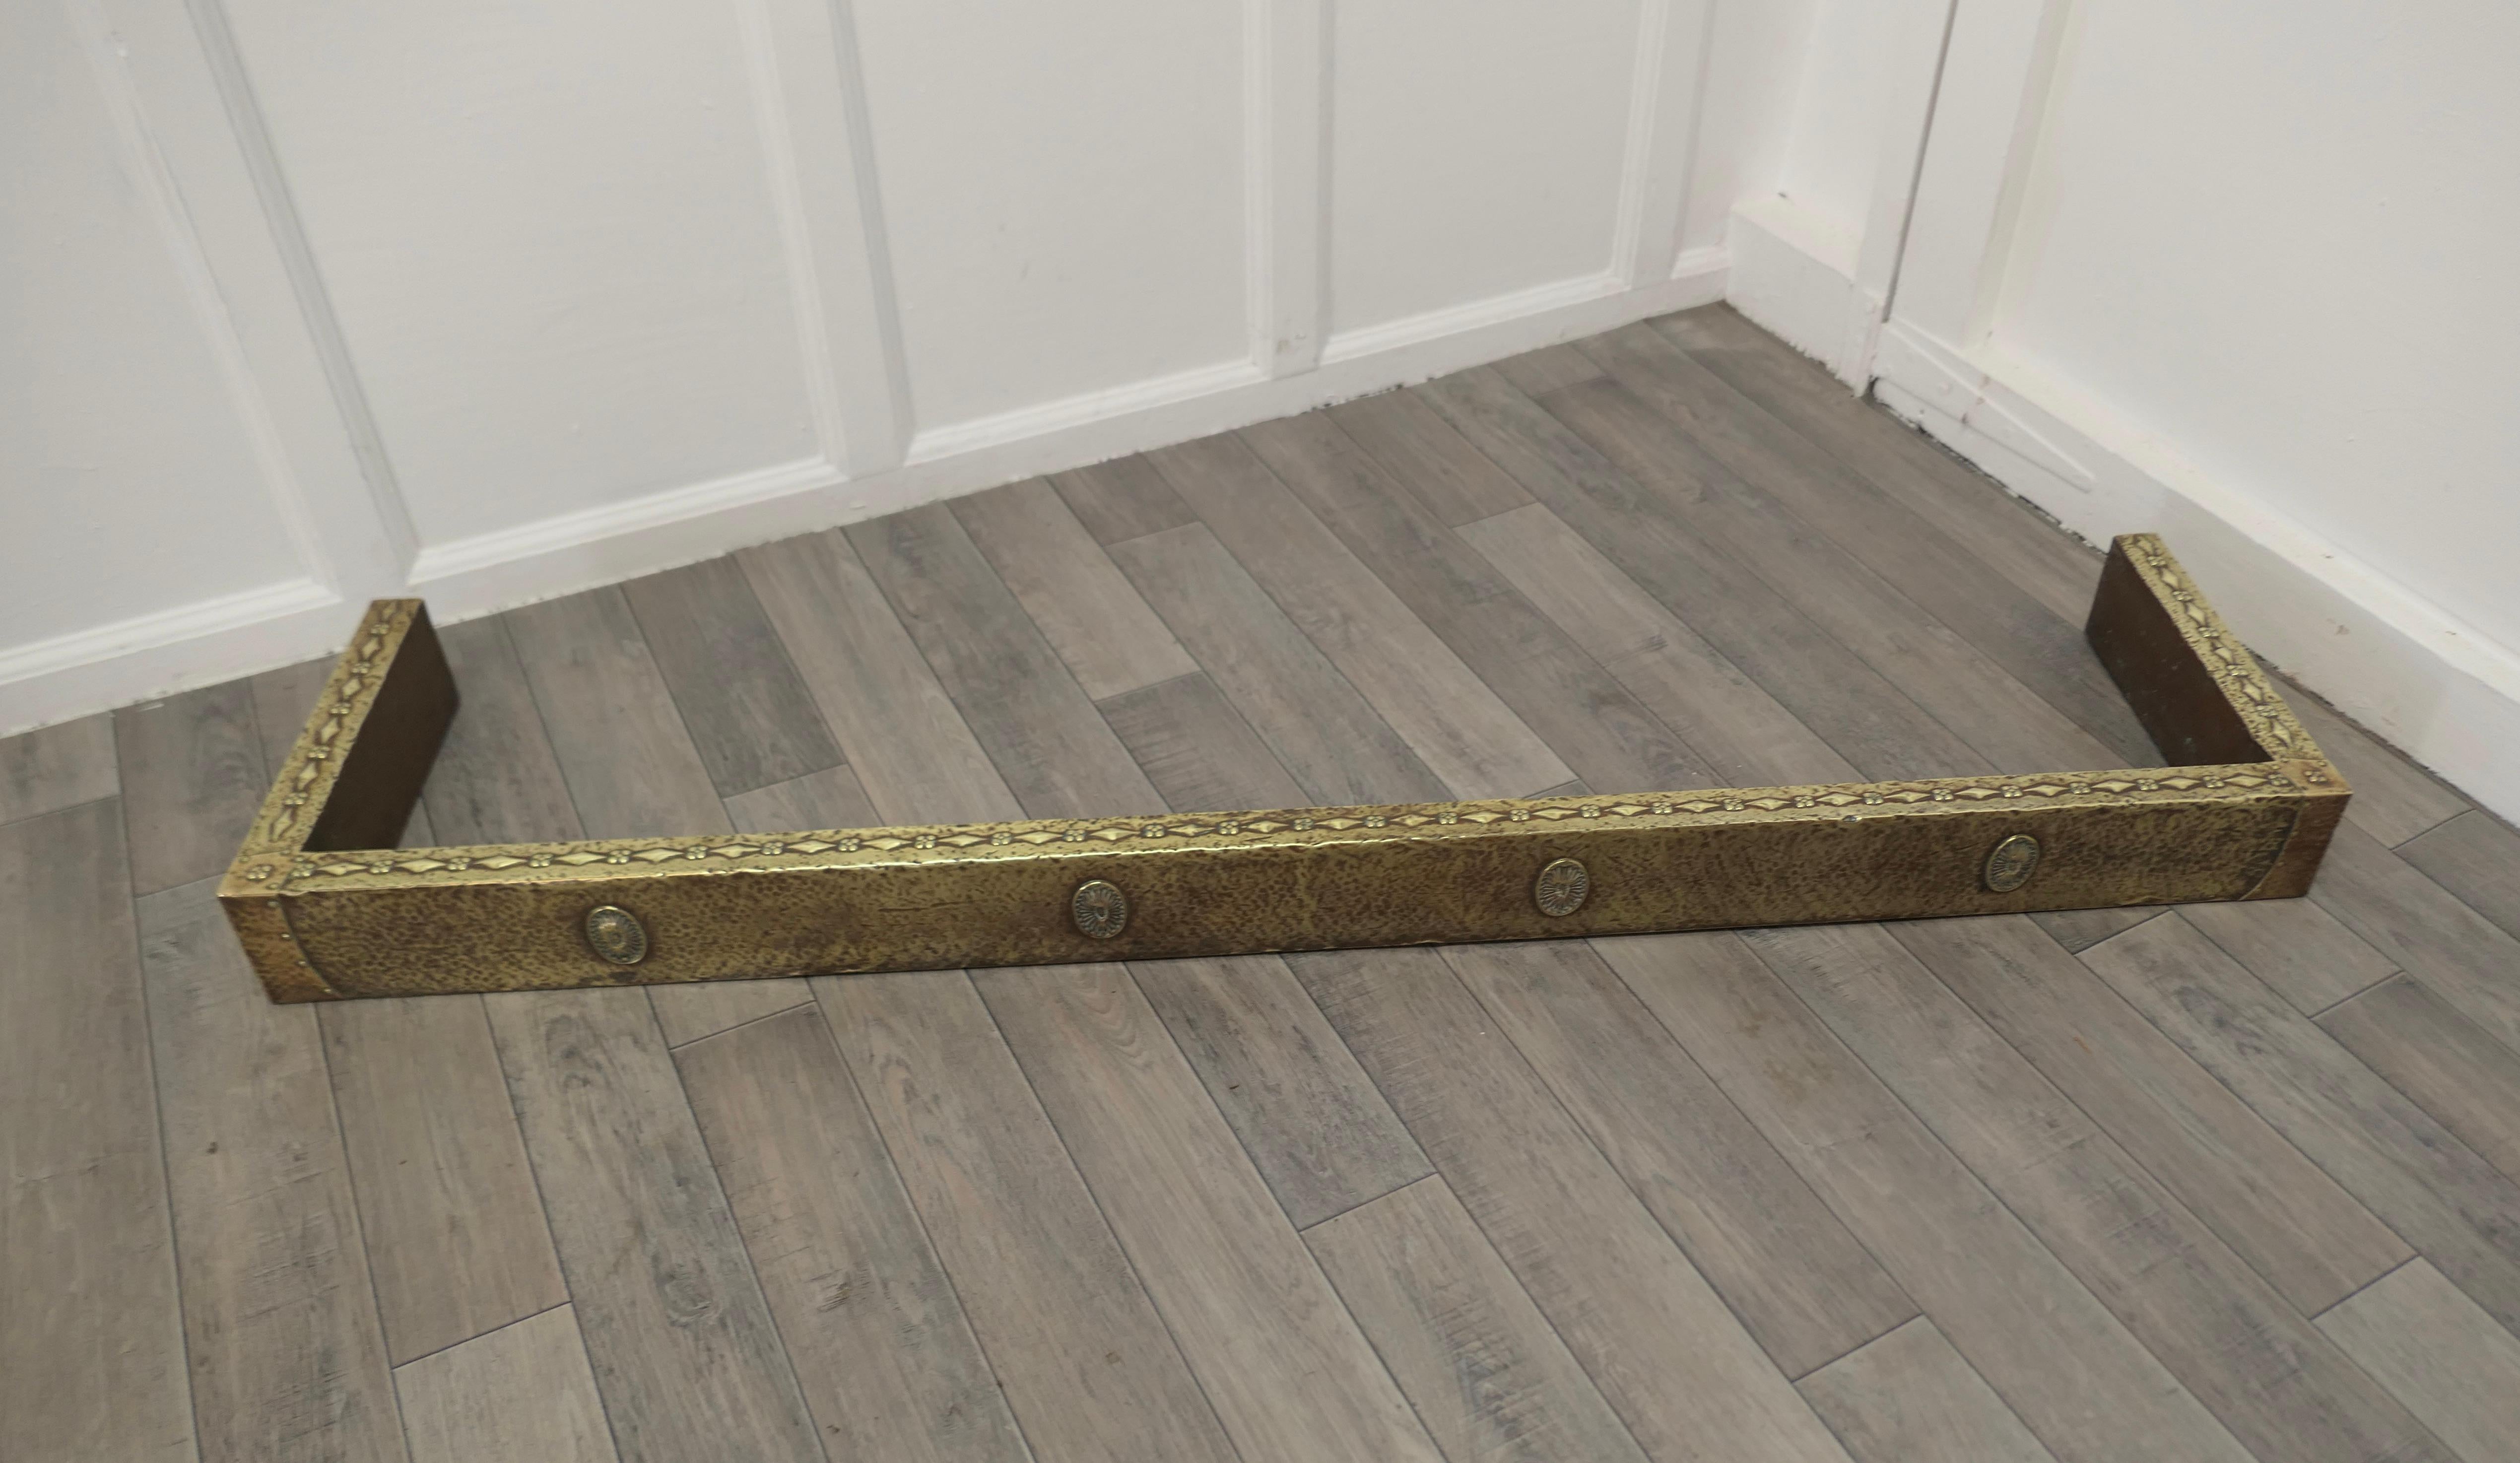 Long Arts and Crafts Beaten Brass Fender

 This is a good large Brass Fender it is worked in beaten brass and with a slightly brutalist look to the finish
The Fender is in good condition it is 4” high, and 57” long and 14” deep 
GF30.
 